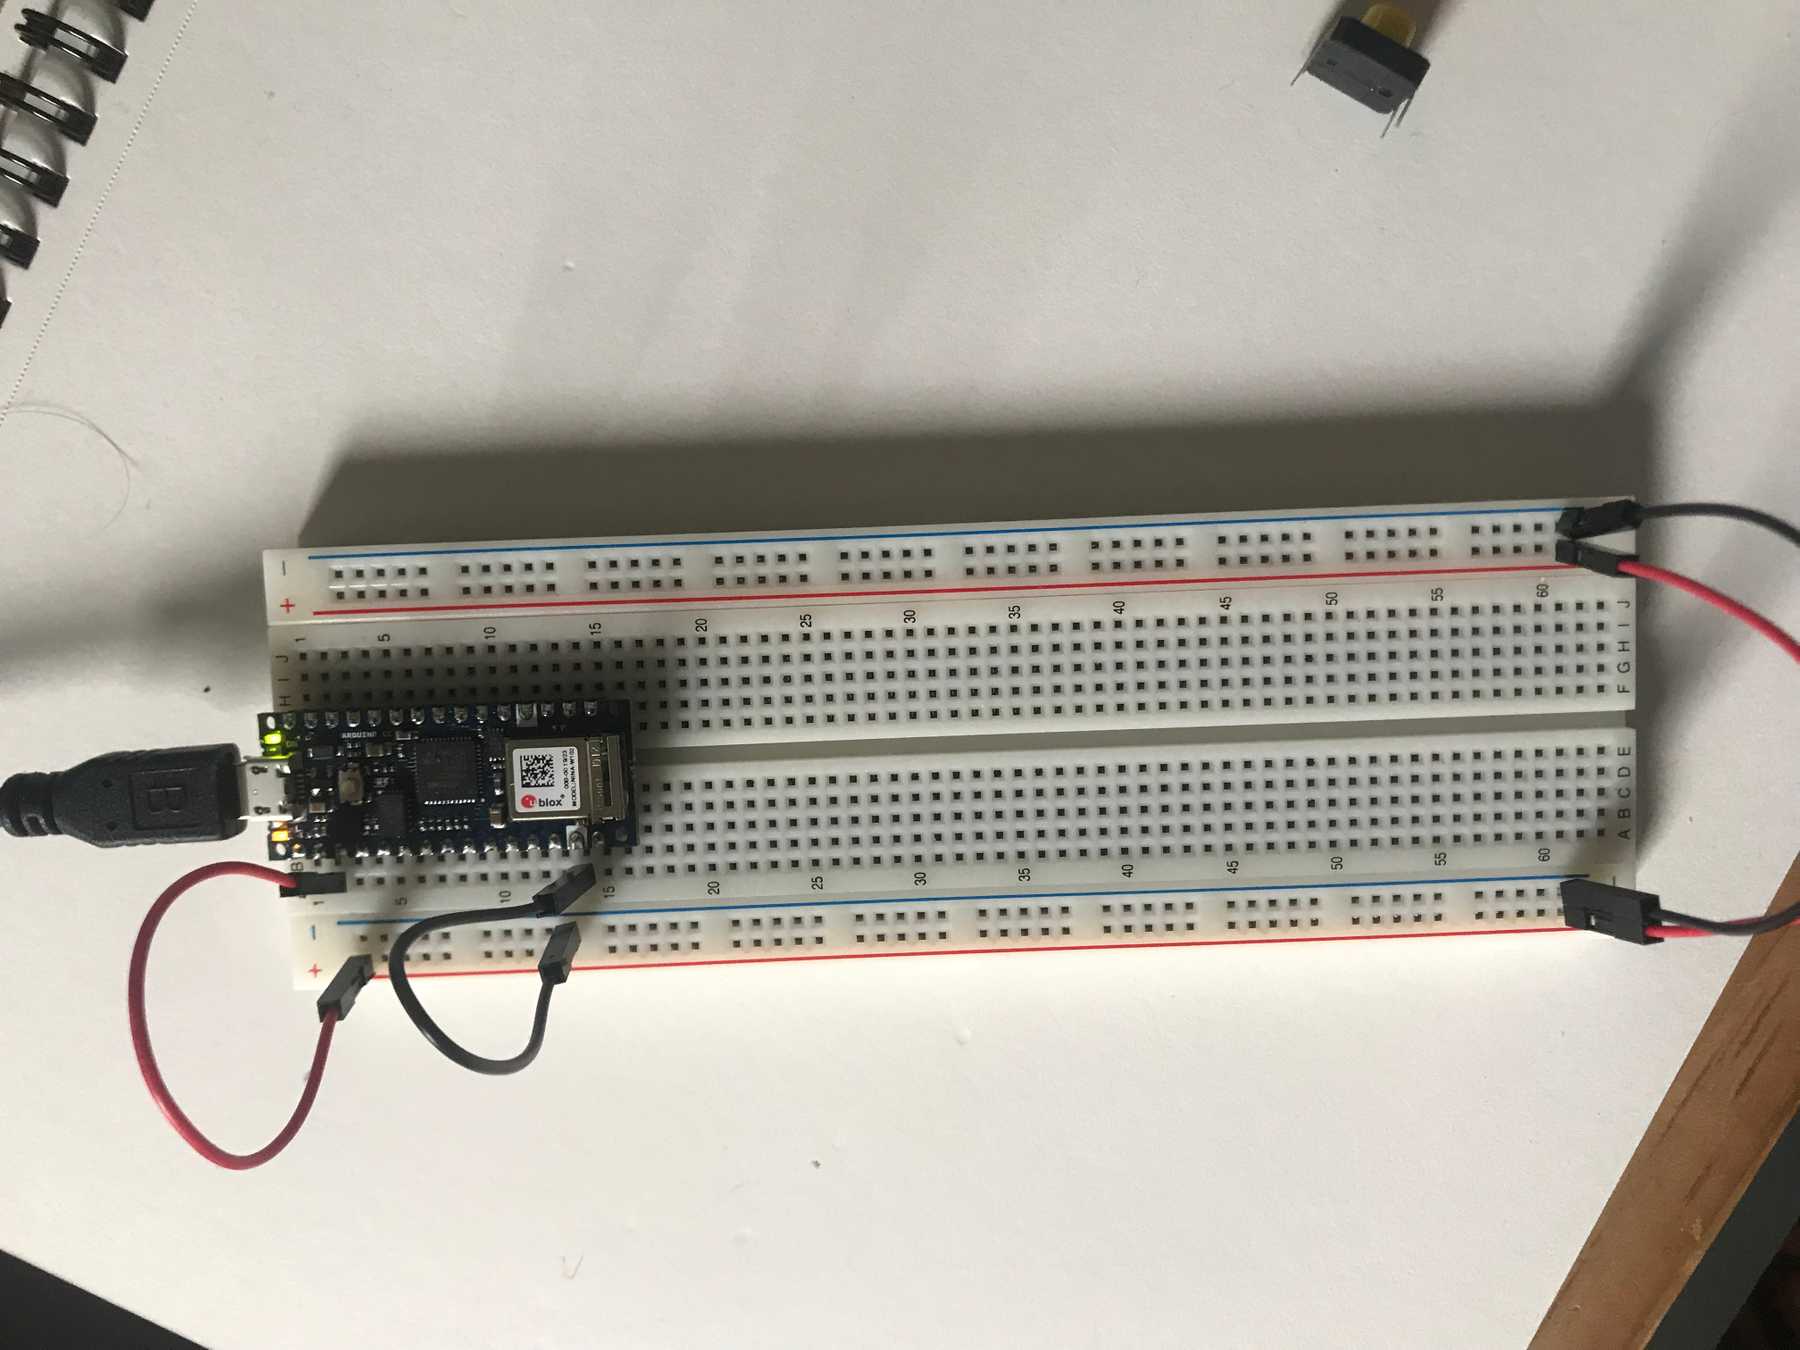 Attaching the Arduino to the breadboard